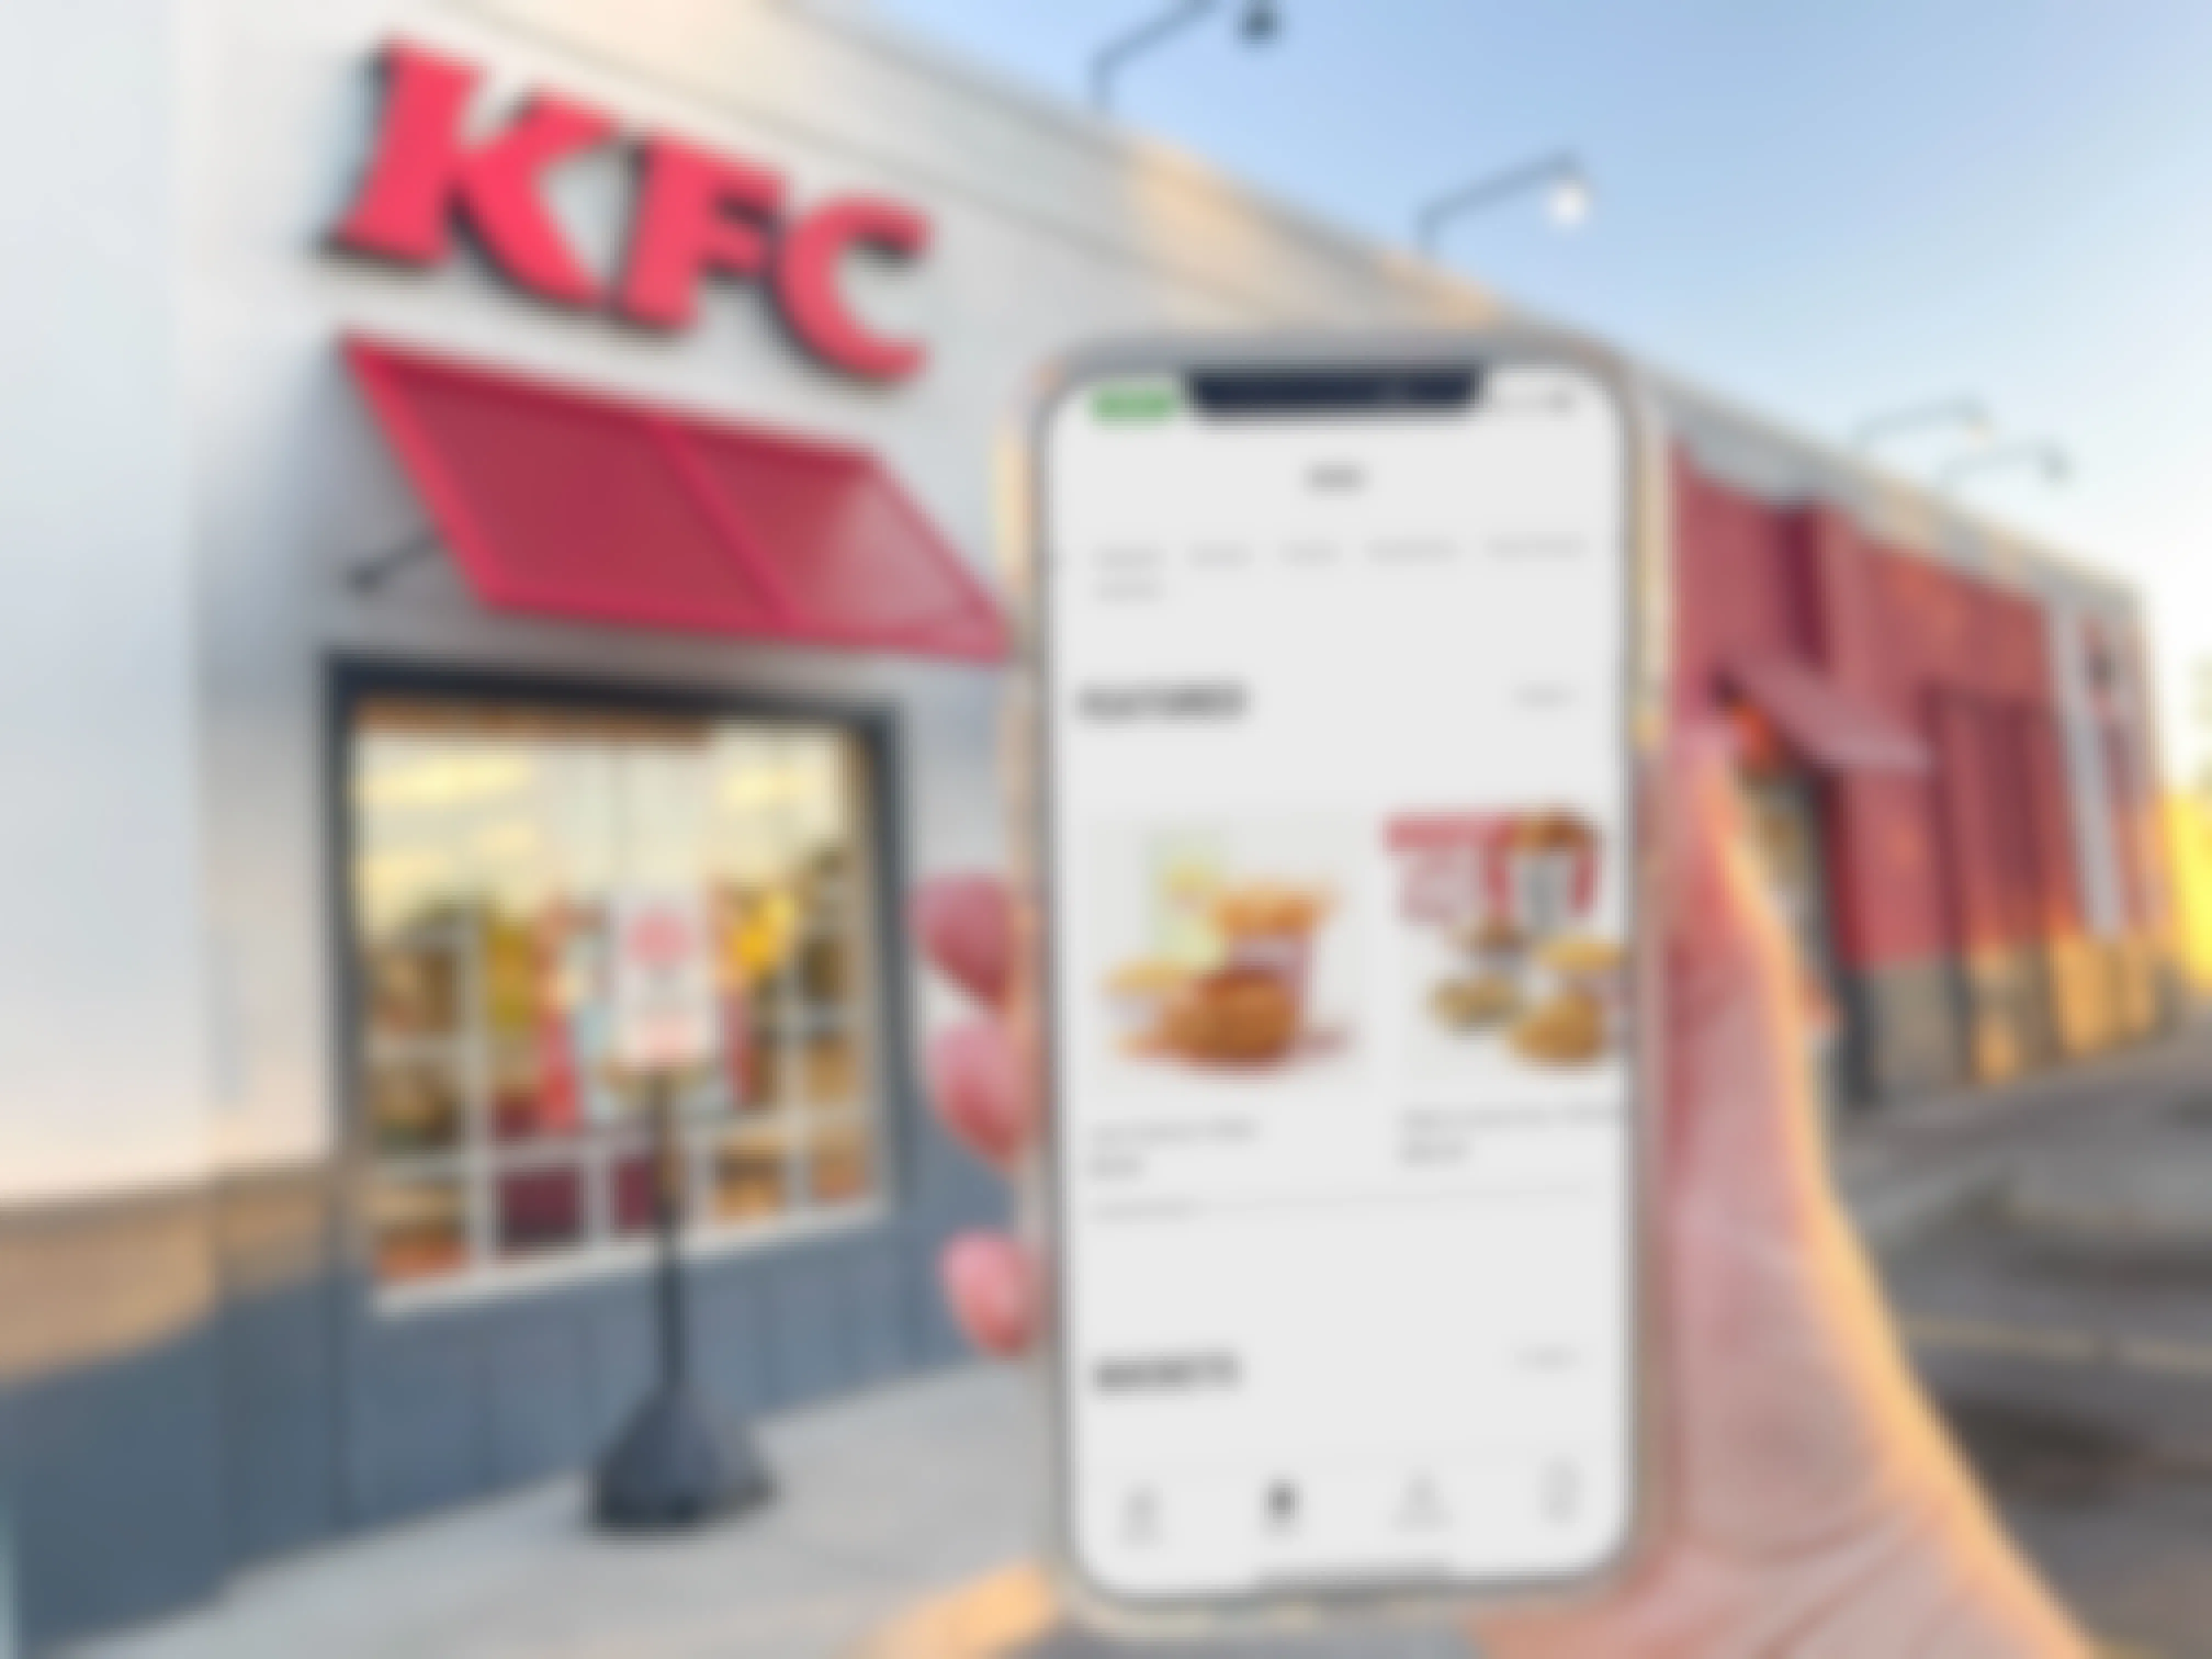 A person's hand holding up an iPhone displaying the KFC app in front of a KFC restaurant.